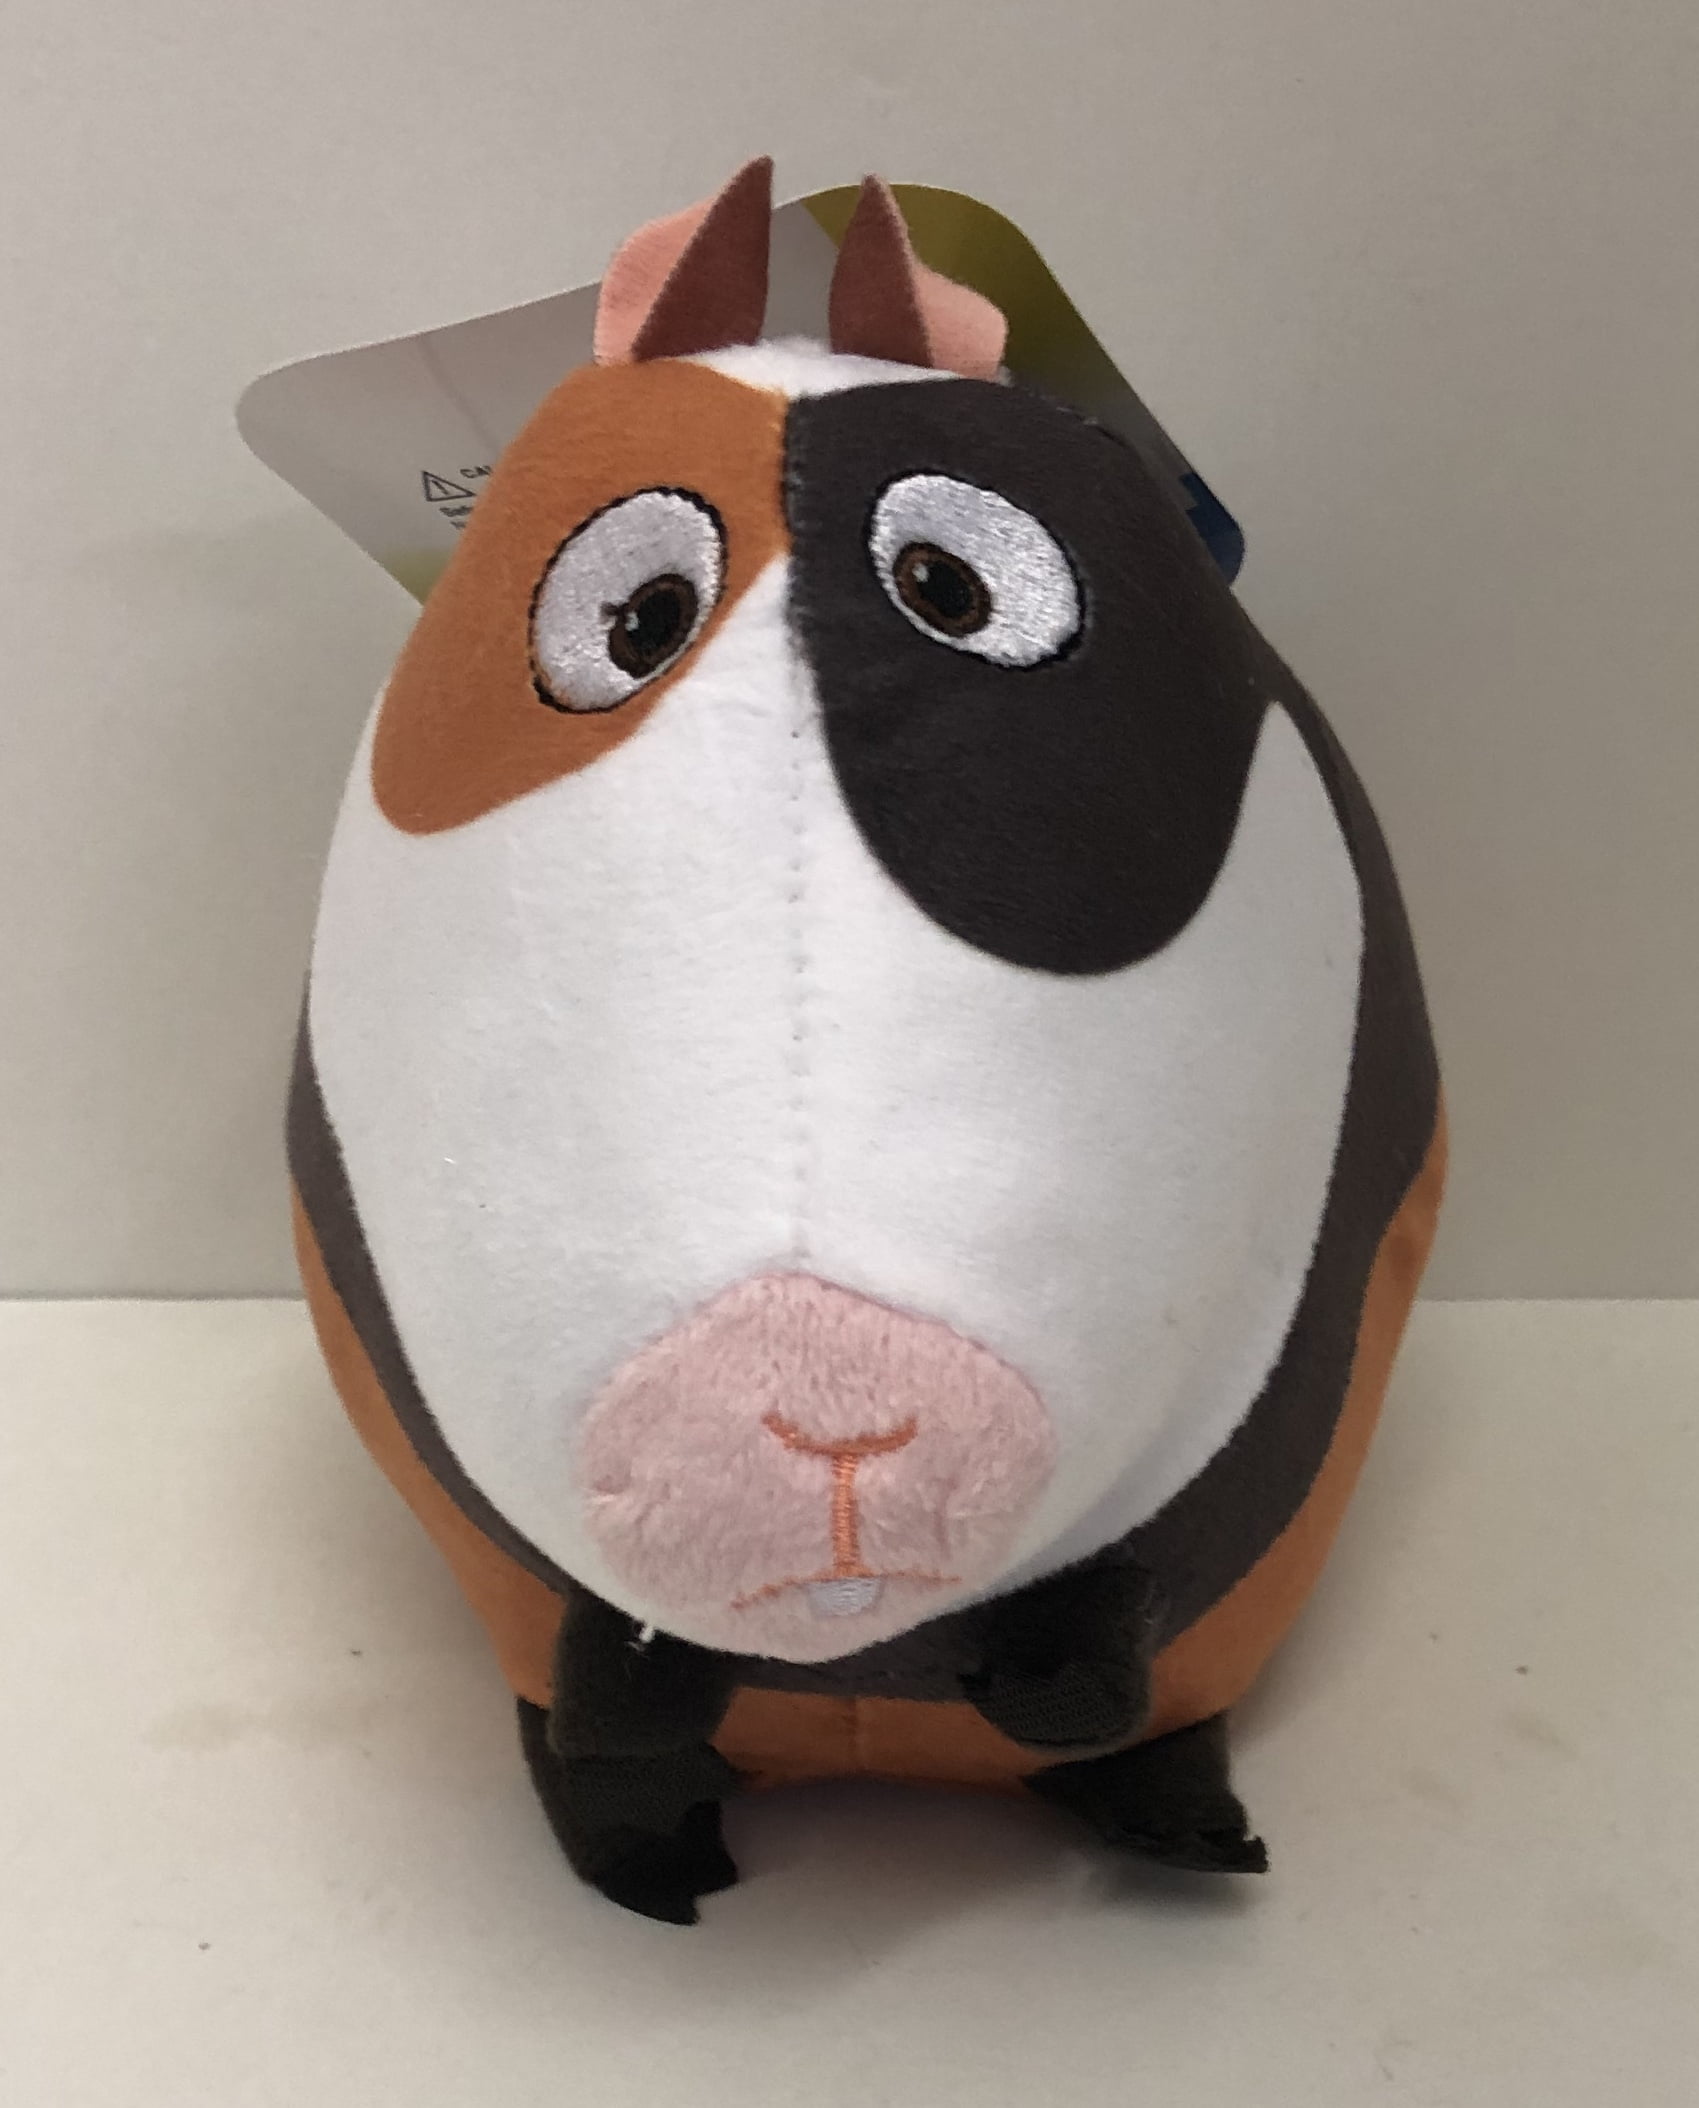 Ty Beanie Baby Plush Stuffed Animal 6" NORMAN the Secret Life of Pets Guinea Pig 